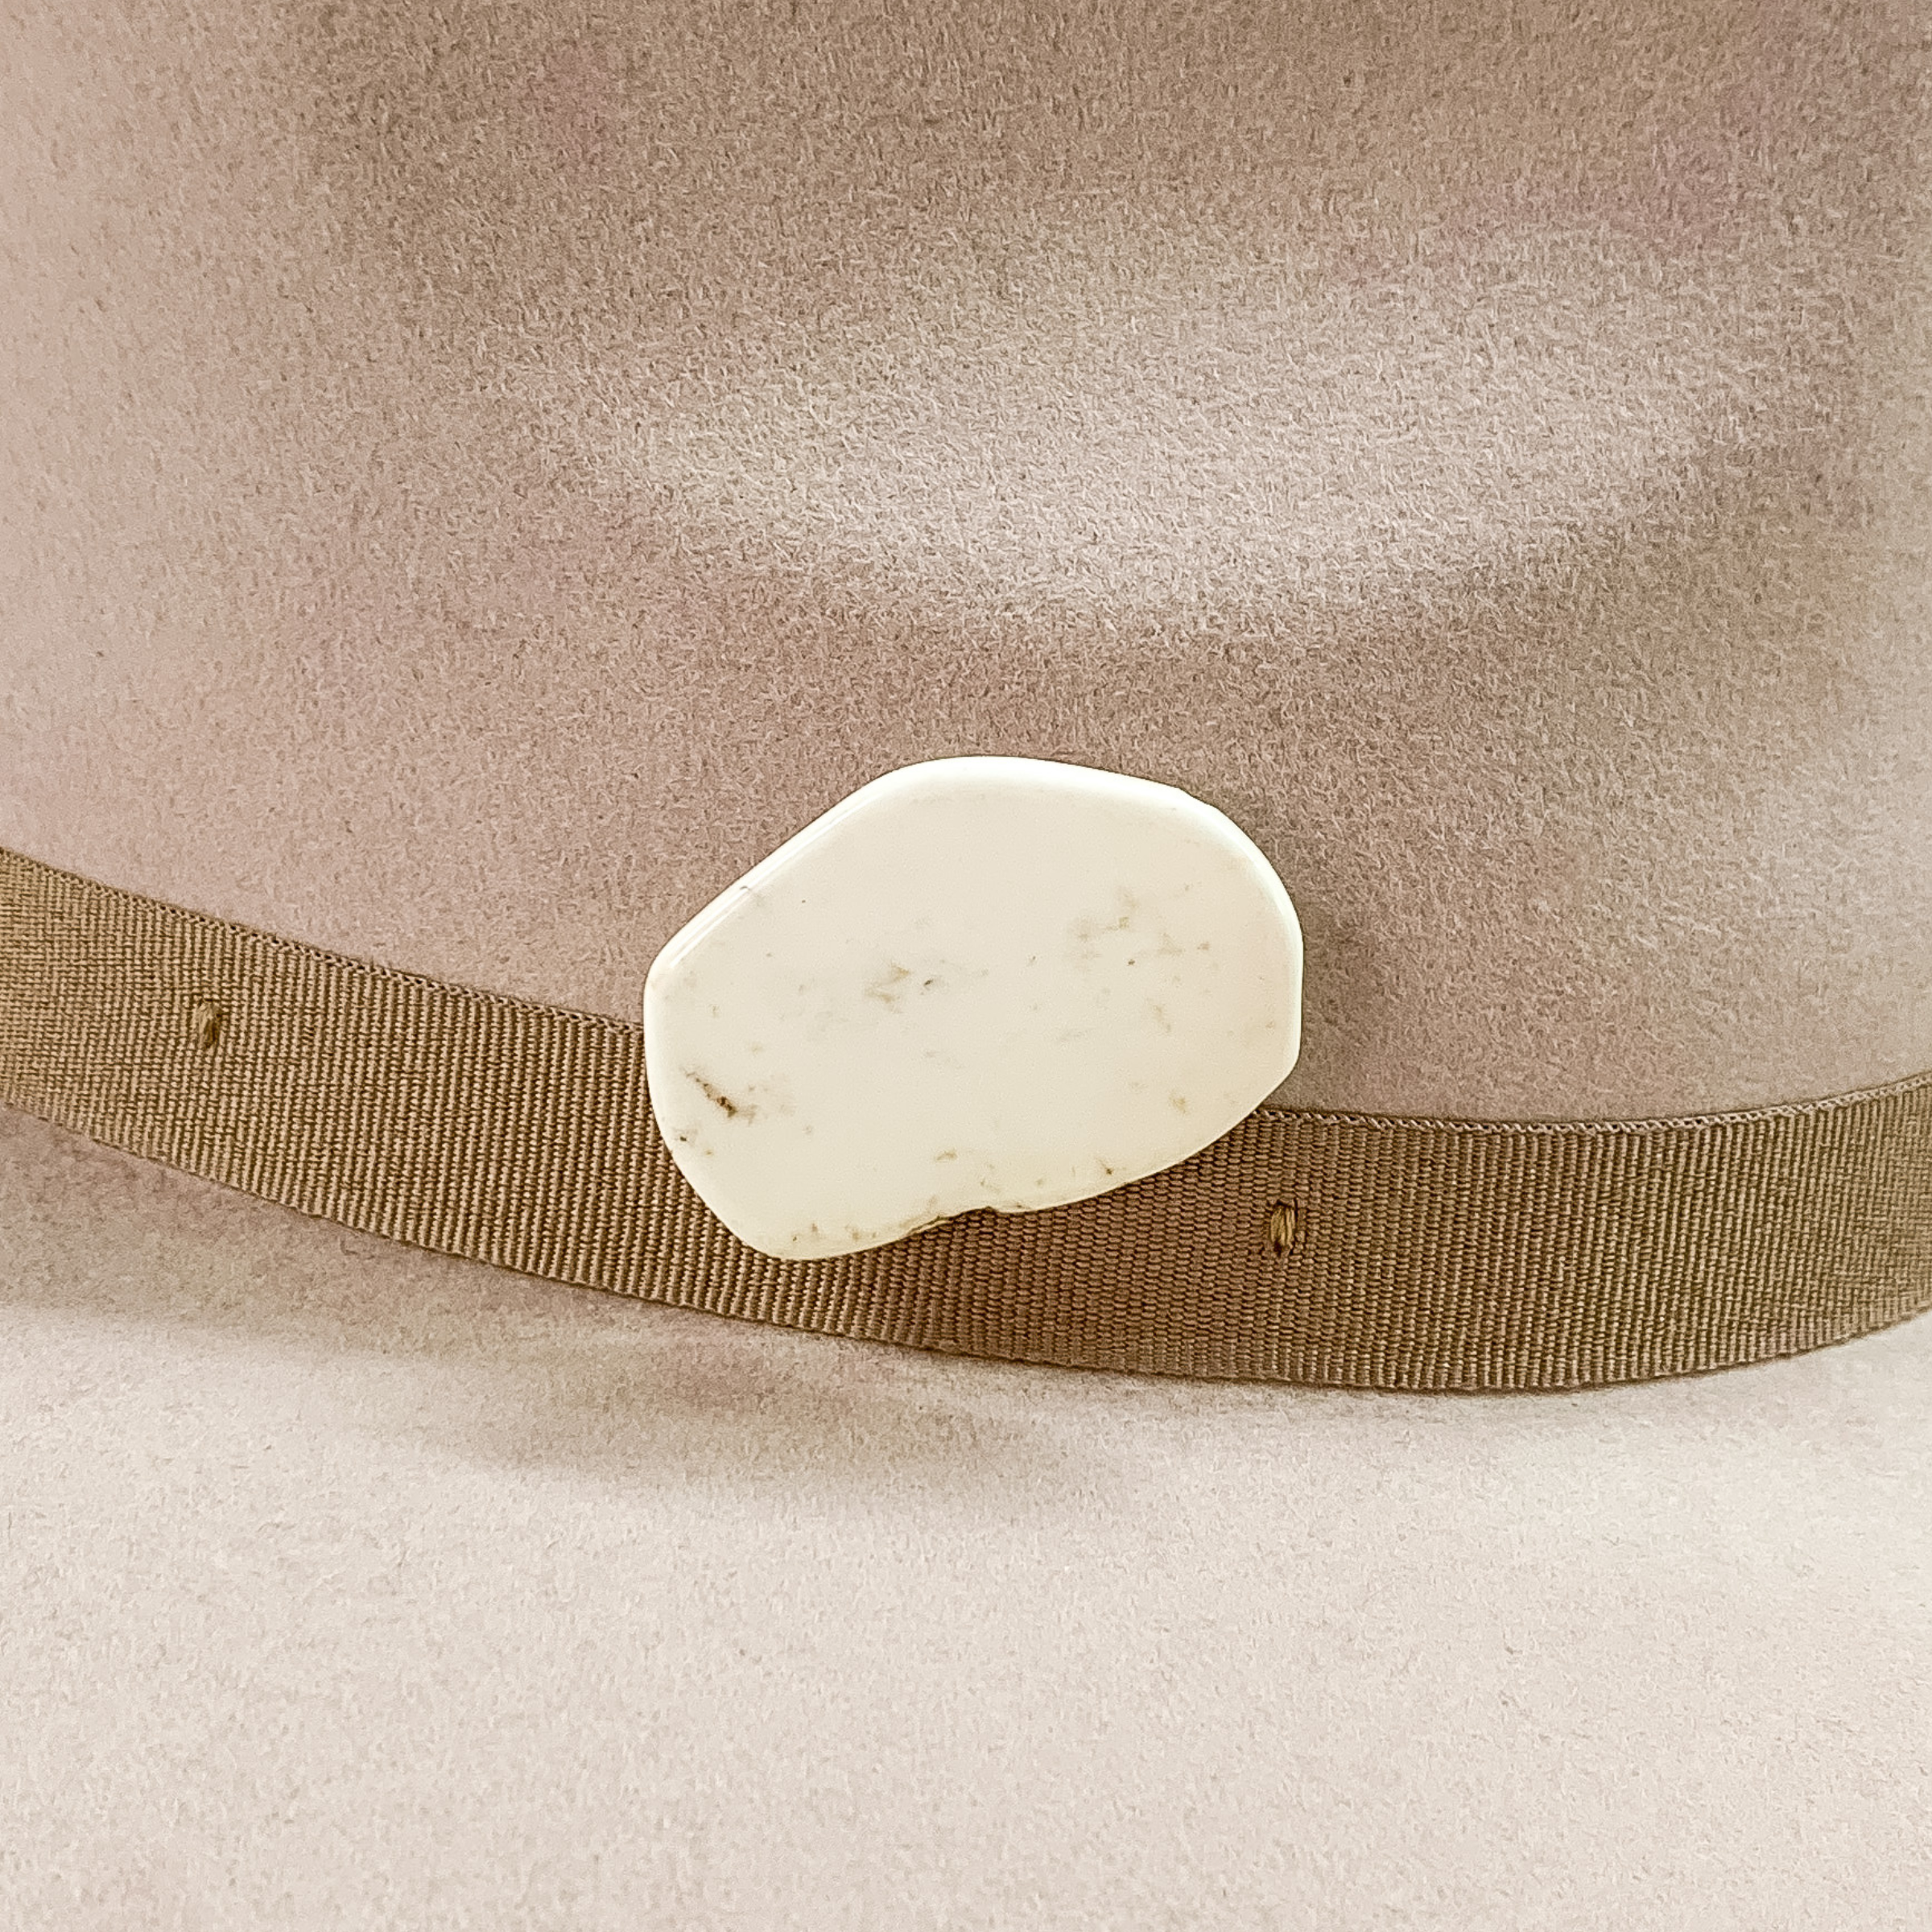 Ivory stone with an irregular shape hat pin pictured on a beige colored hat. 